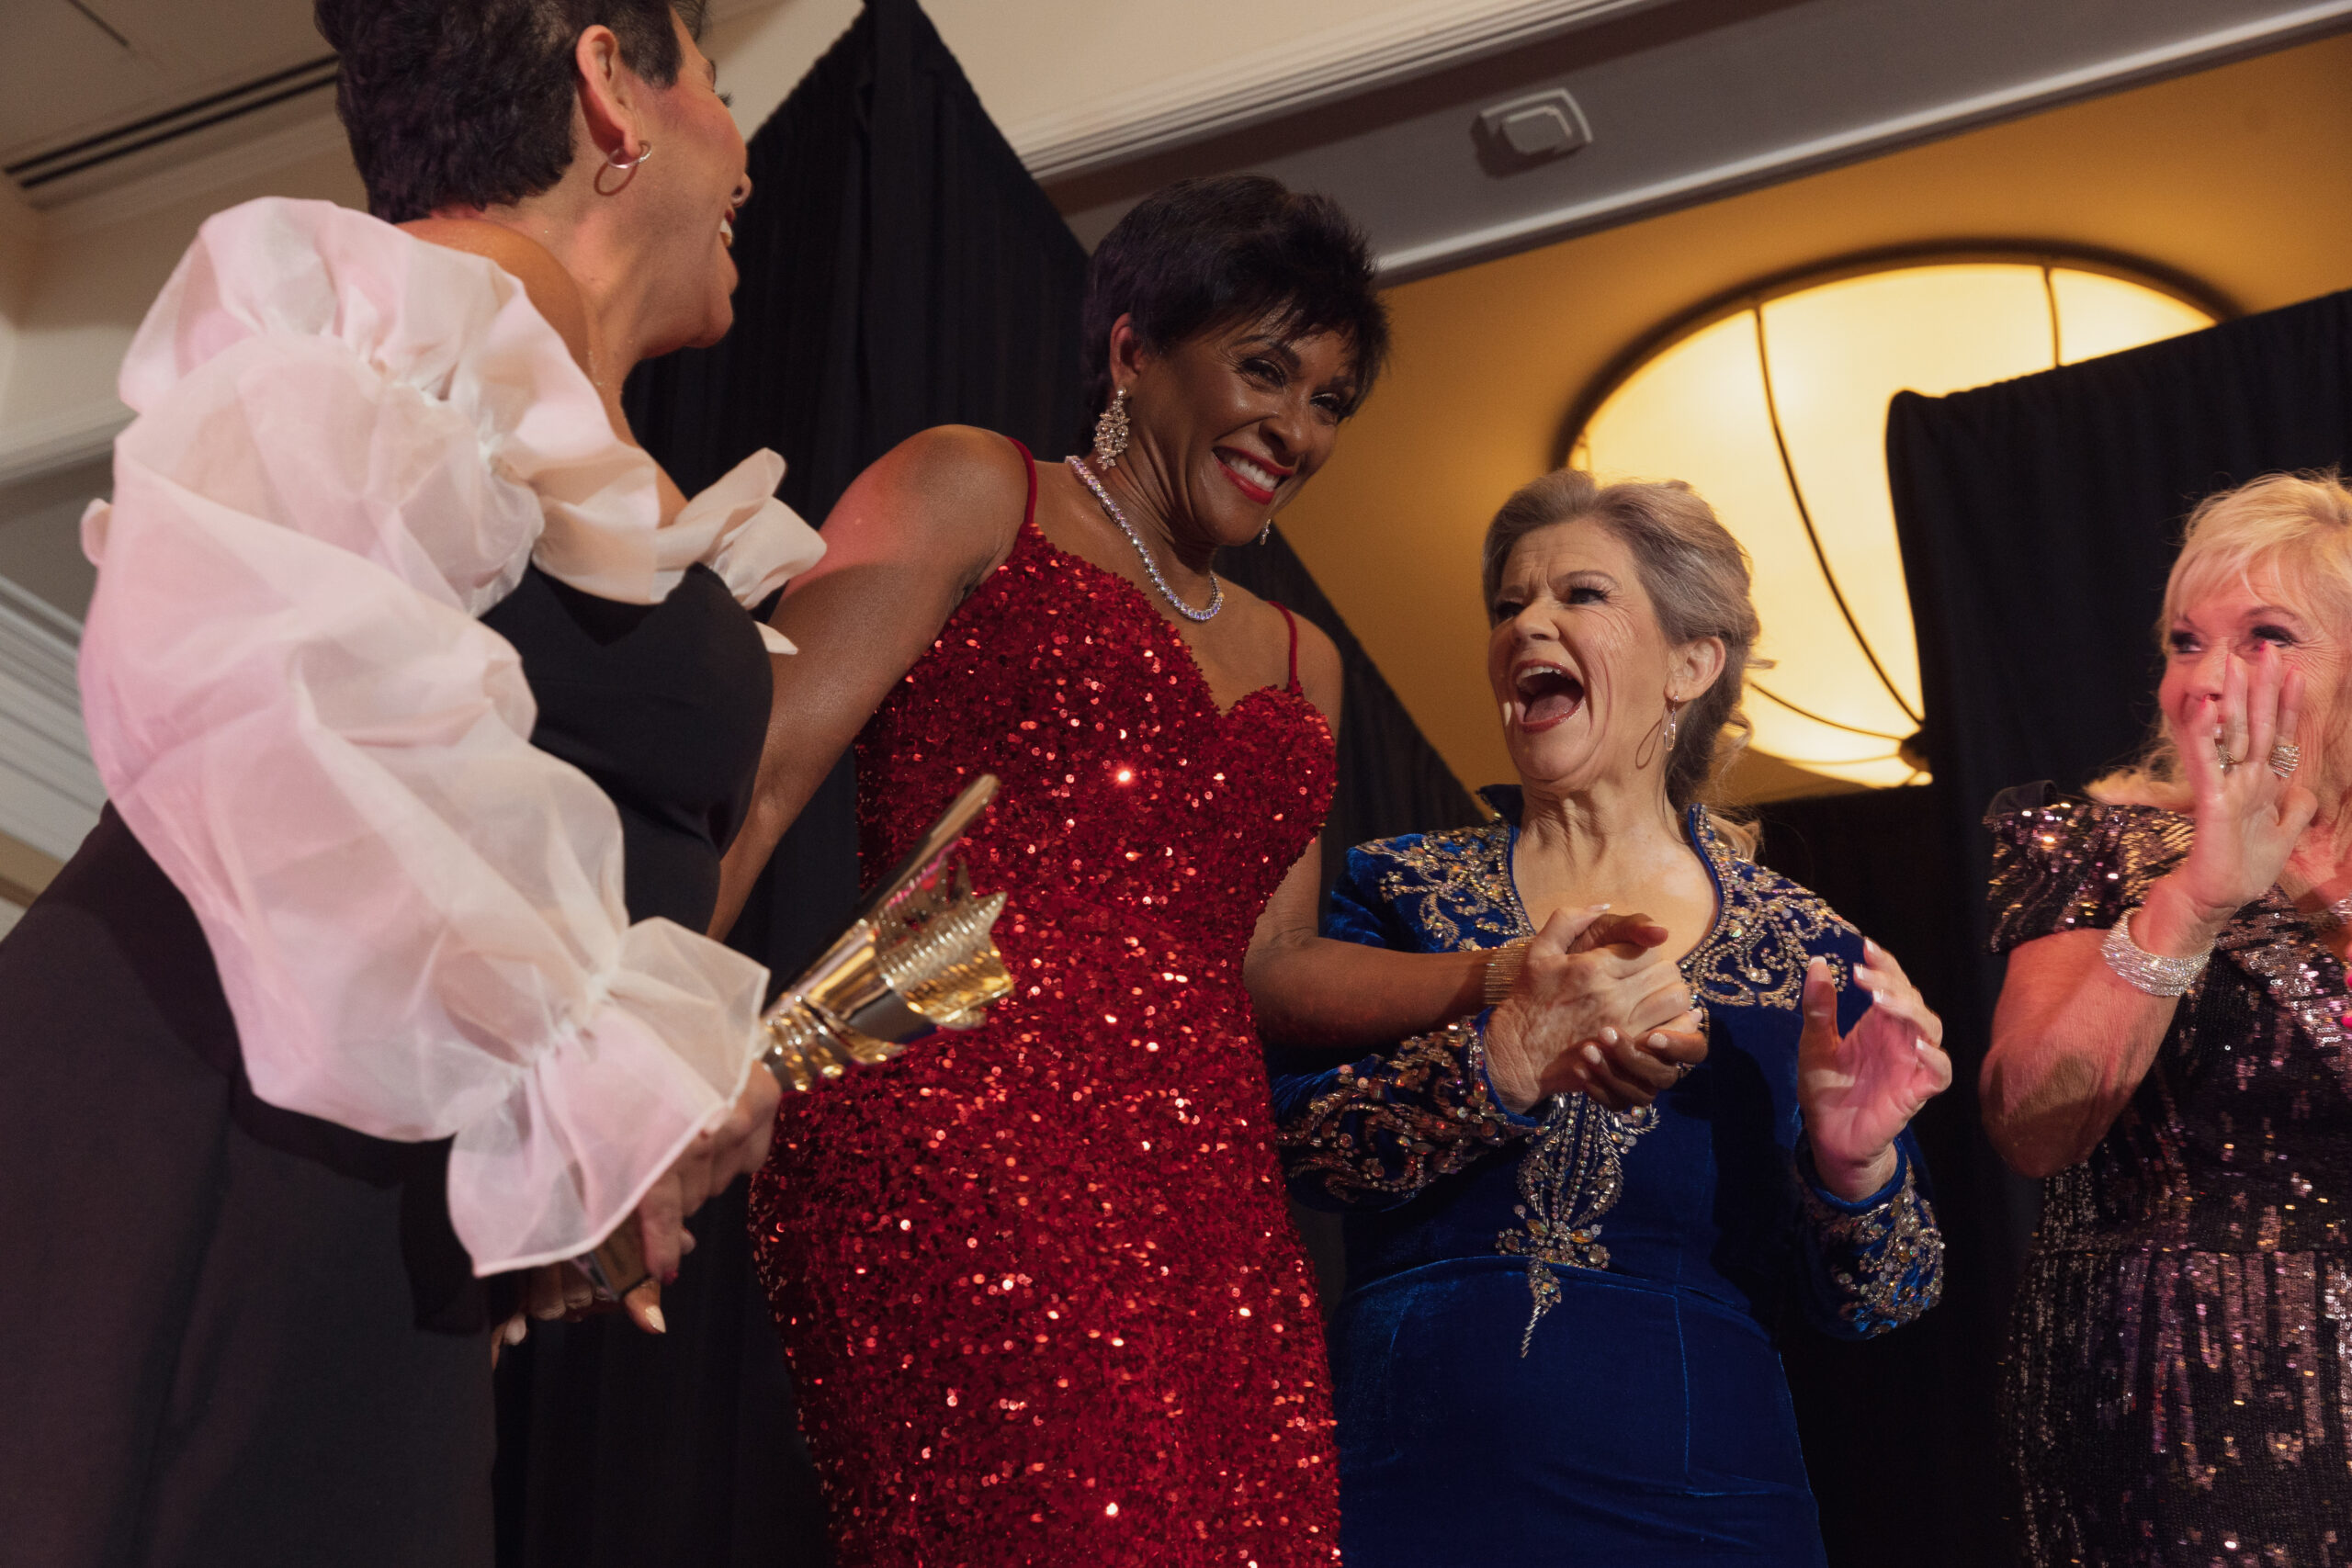 A Black woman in a red sequined dress grins as three other woman laugh and celebrate her victory as Ms. Texas Senior America alongside her.